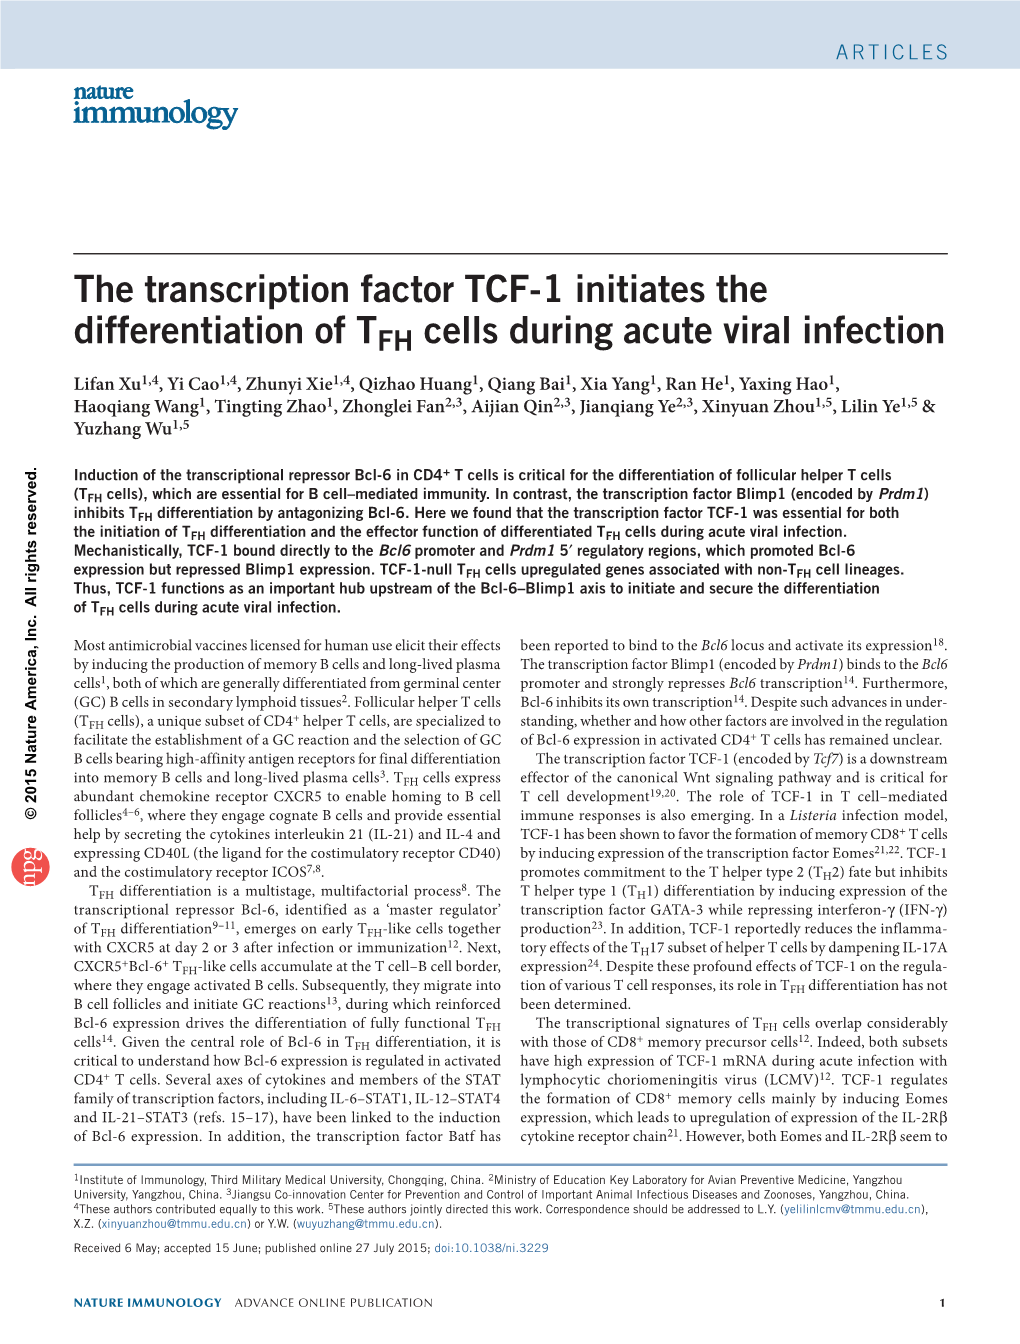 The Transcription Factor TCF-1 Initiates the Differentiation of TFH Cells During Acute Viral Infection